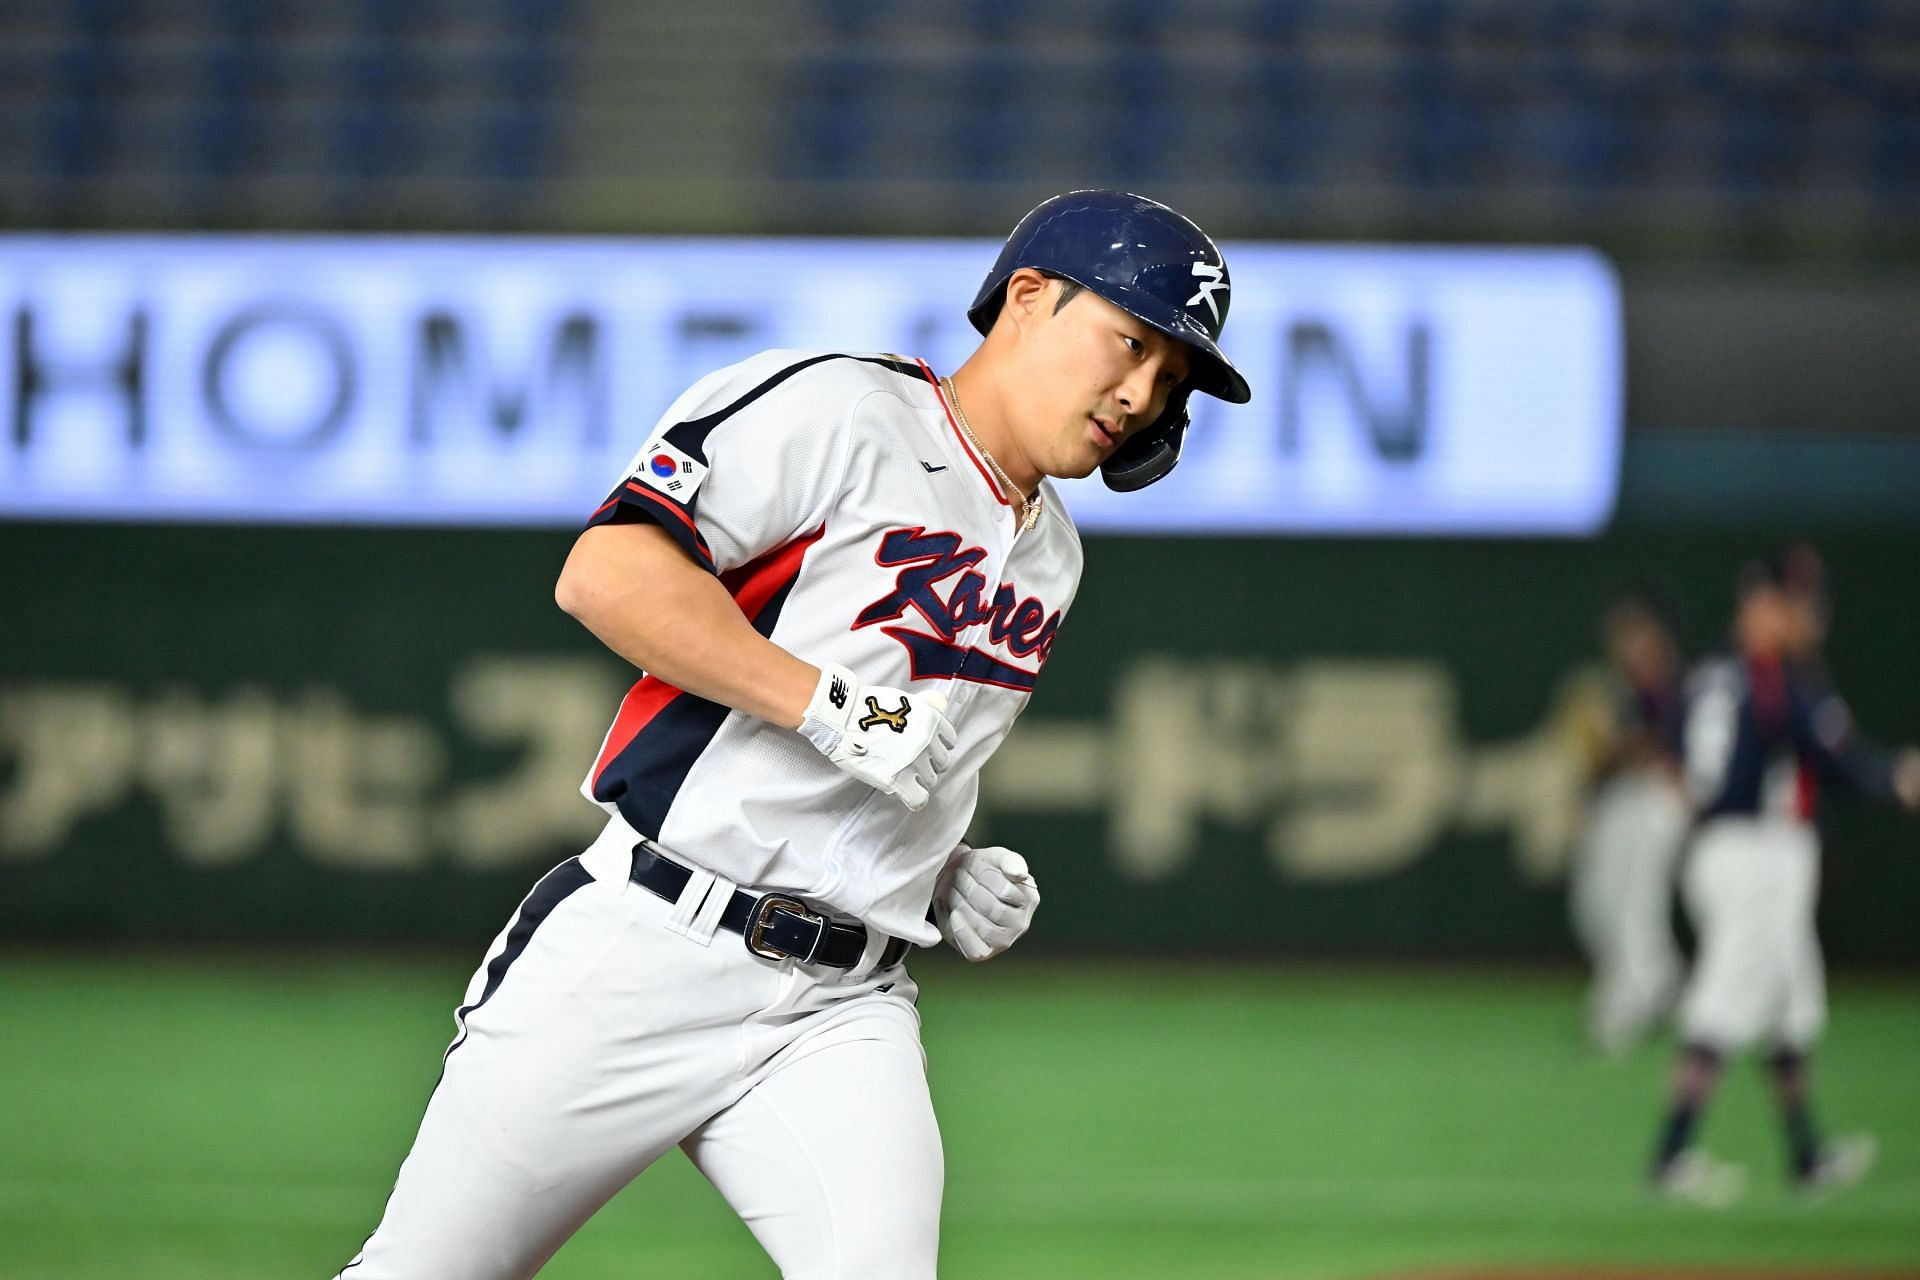 San Diego Padres fans cannot wait for new season as Ha-seong Kim belts two  dingers against Czech Republic in WBC